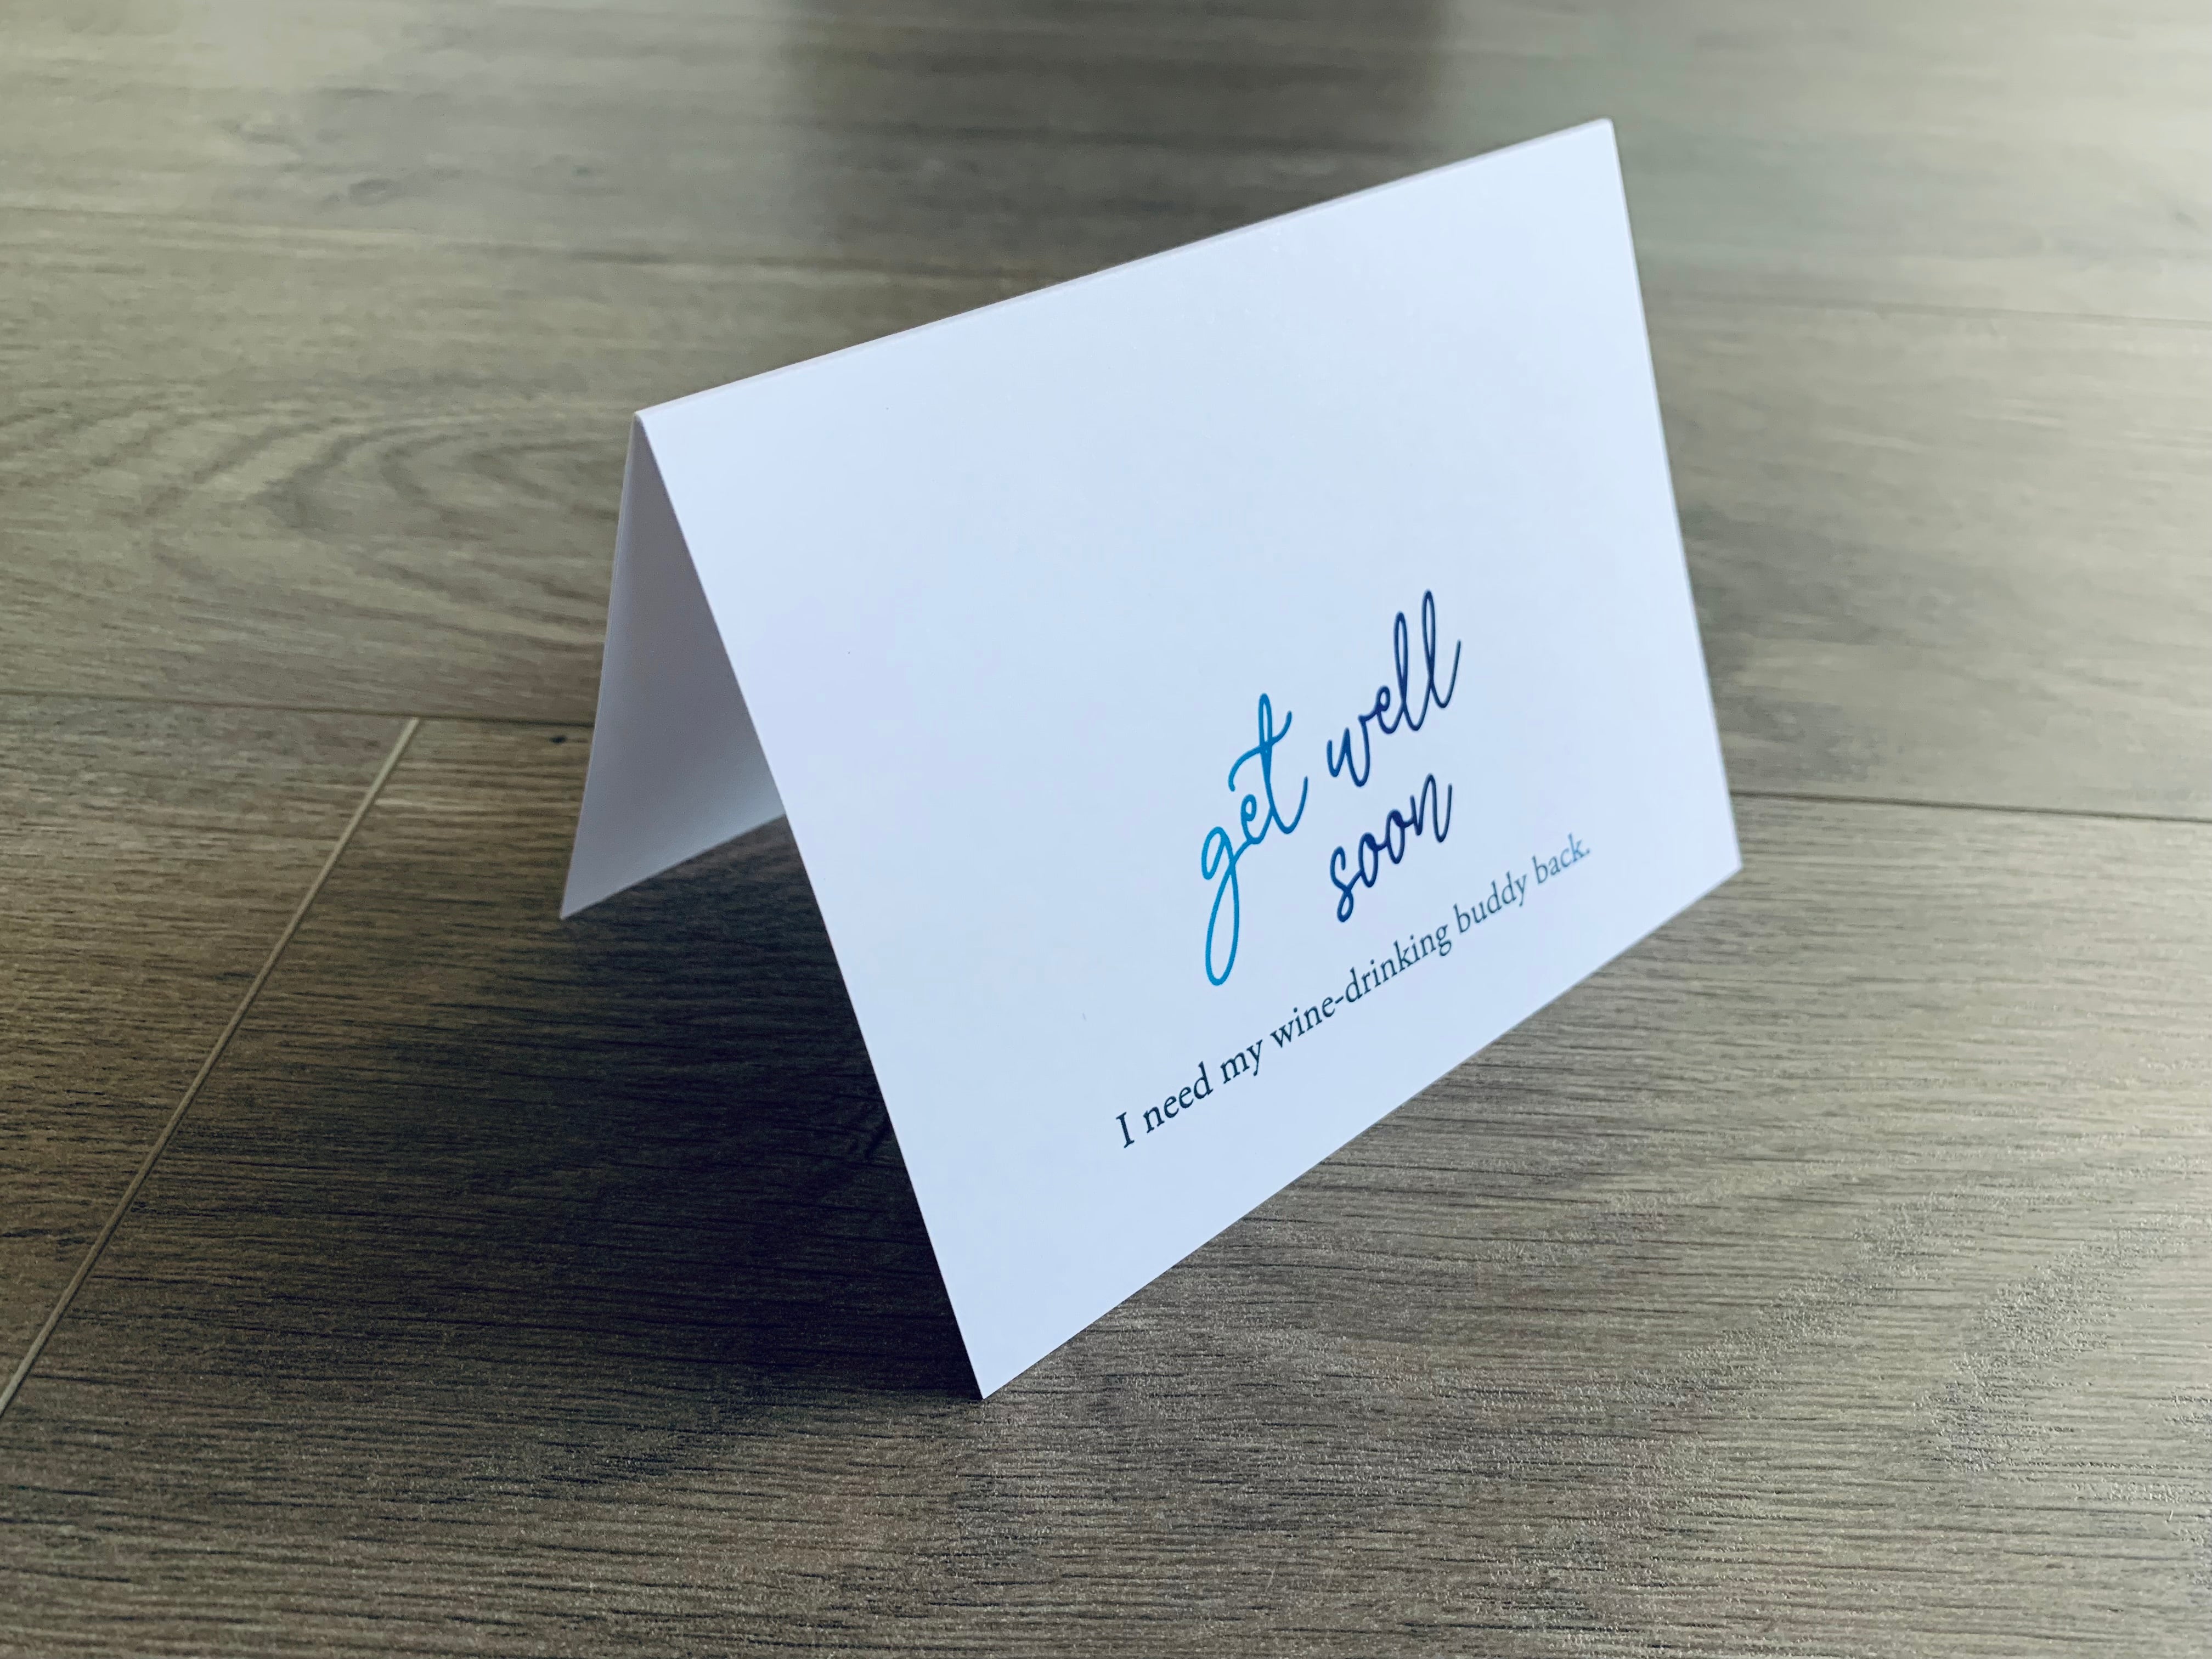 A white, folded get well soon card stands on a wooden floor and reads, "Get well soon. I need my wine-drinking buddy back." Joyful Well Wishes collection by Stationare.